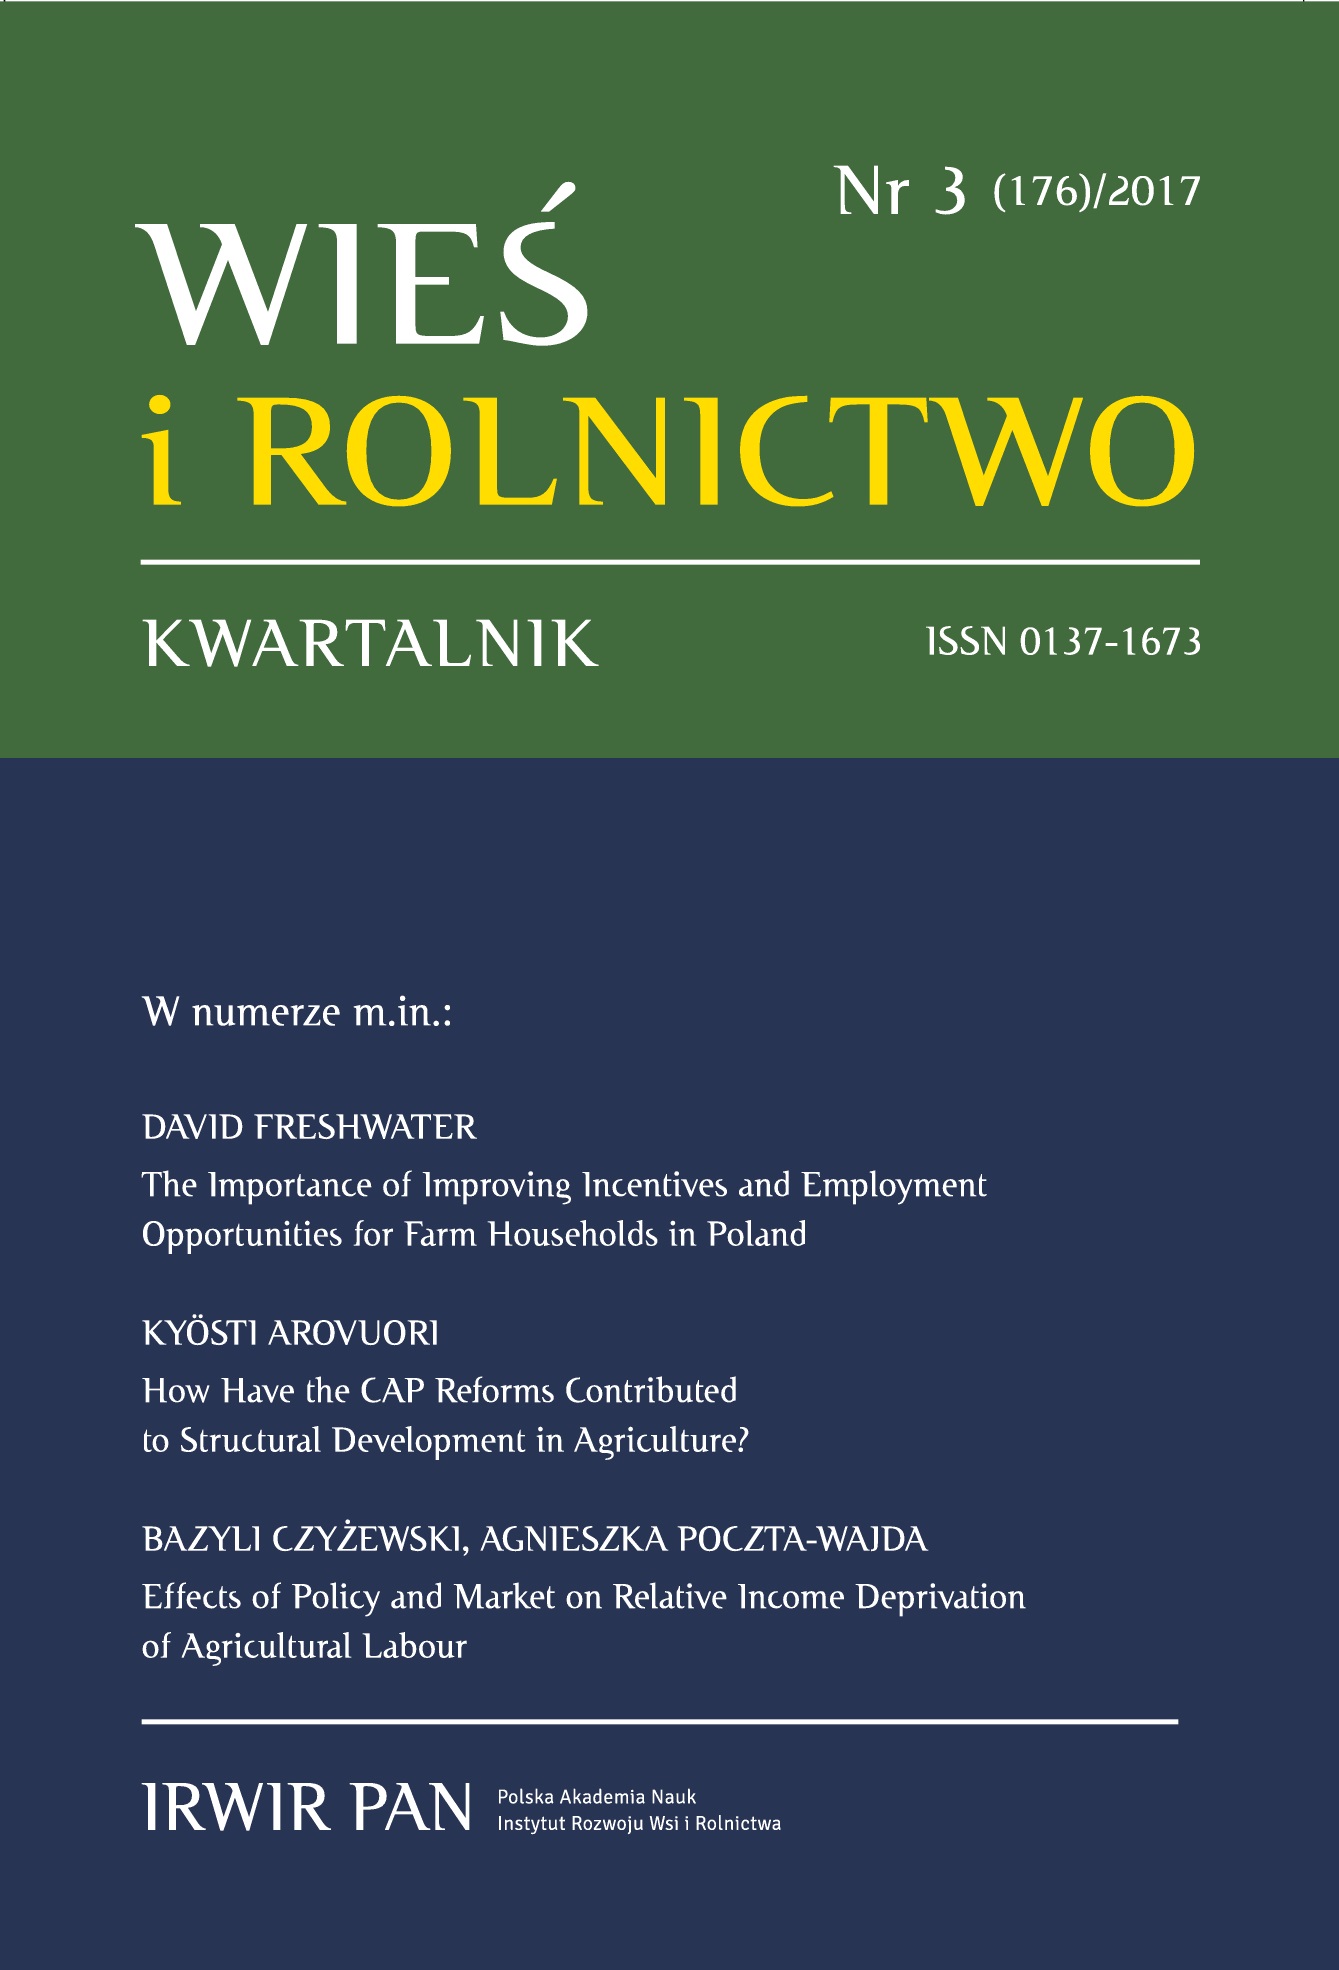 Local Cultural Heritage in the Experience of Residents of Rural Areas, Institute of Rural and Agricultural Development, Polish Academy of Sciences, Scholar Publishing House, Warsaw 2017, ISBN 978-83-7383-876-5, p. 242 Cover Image